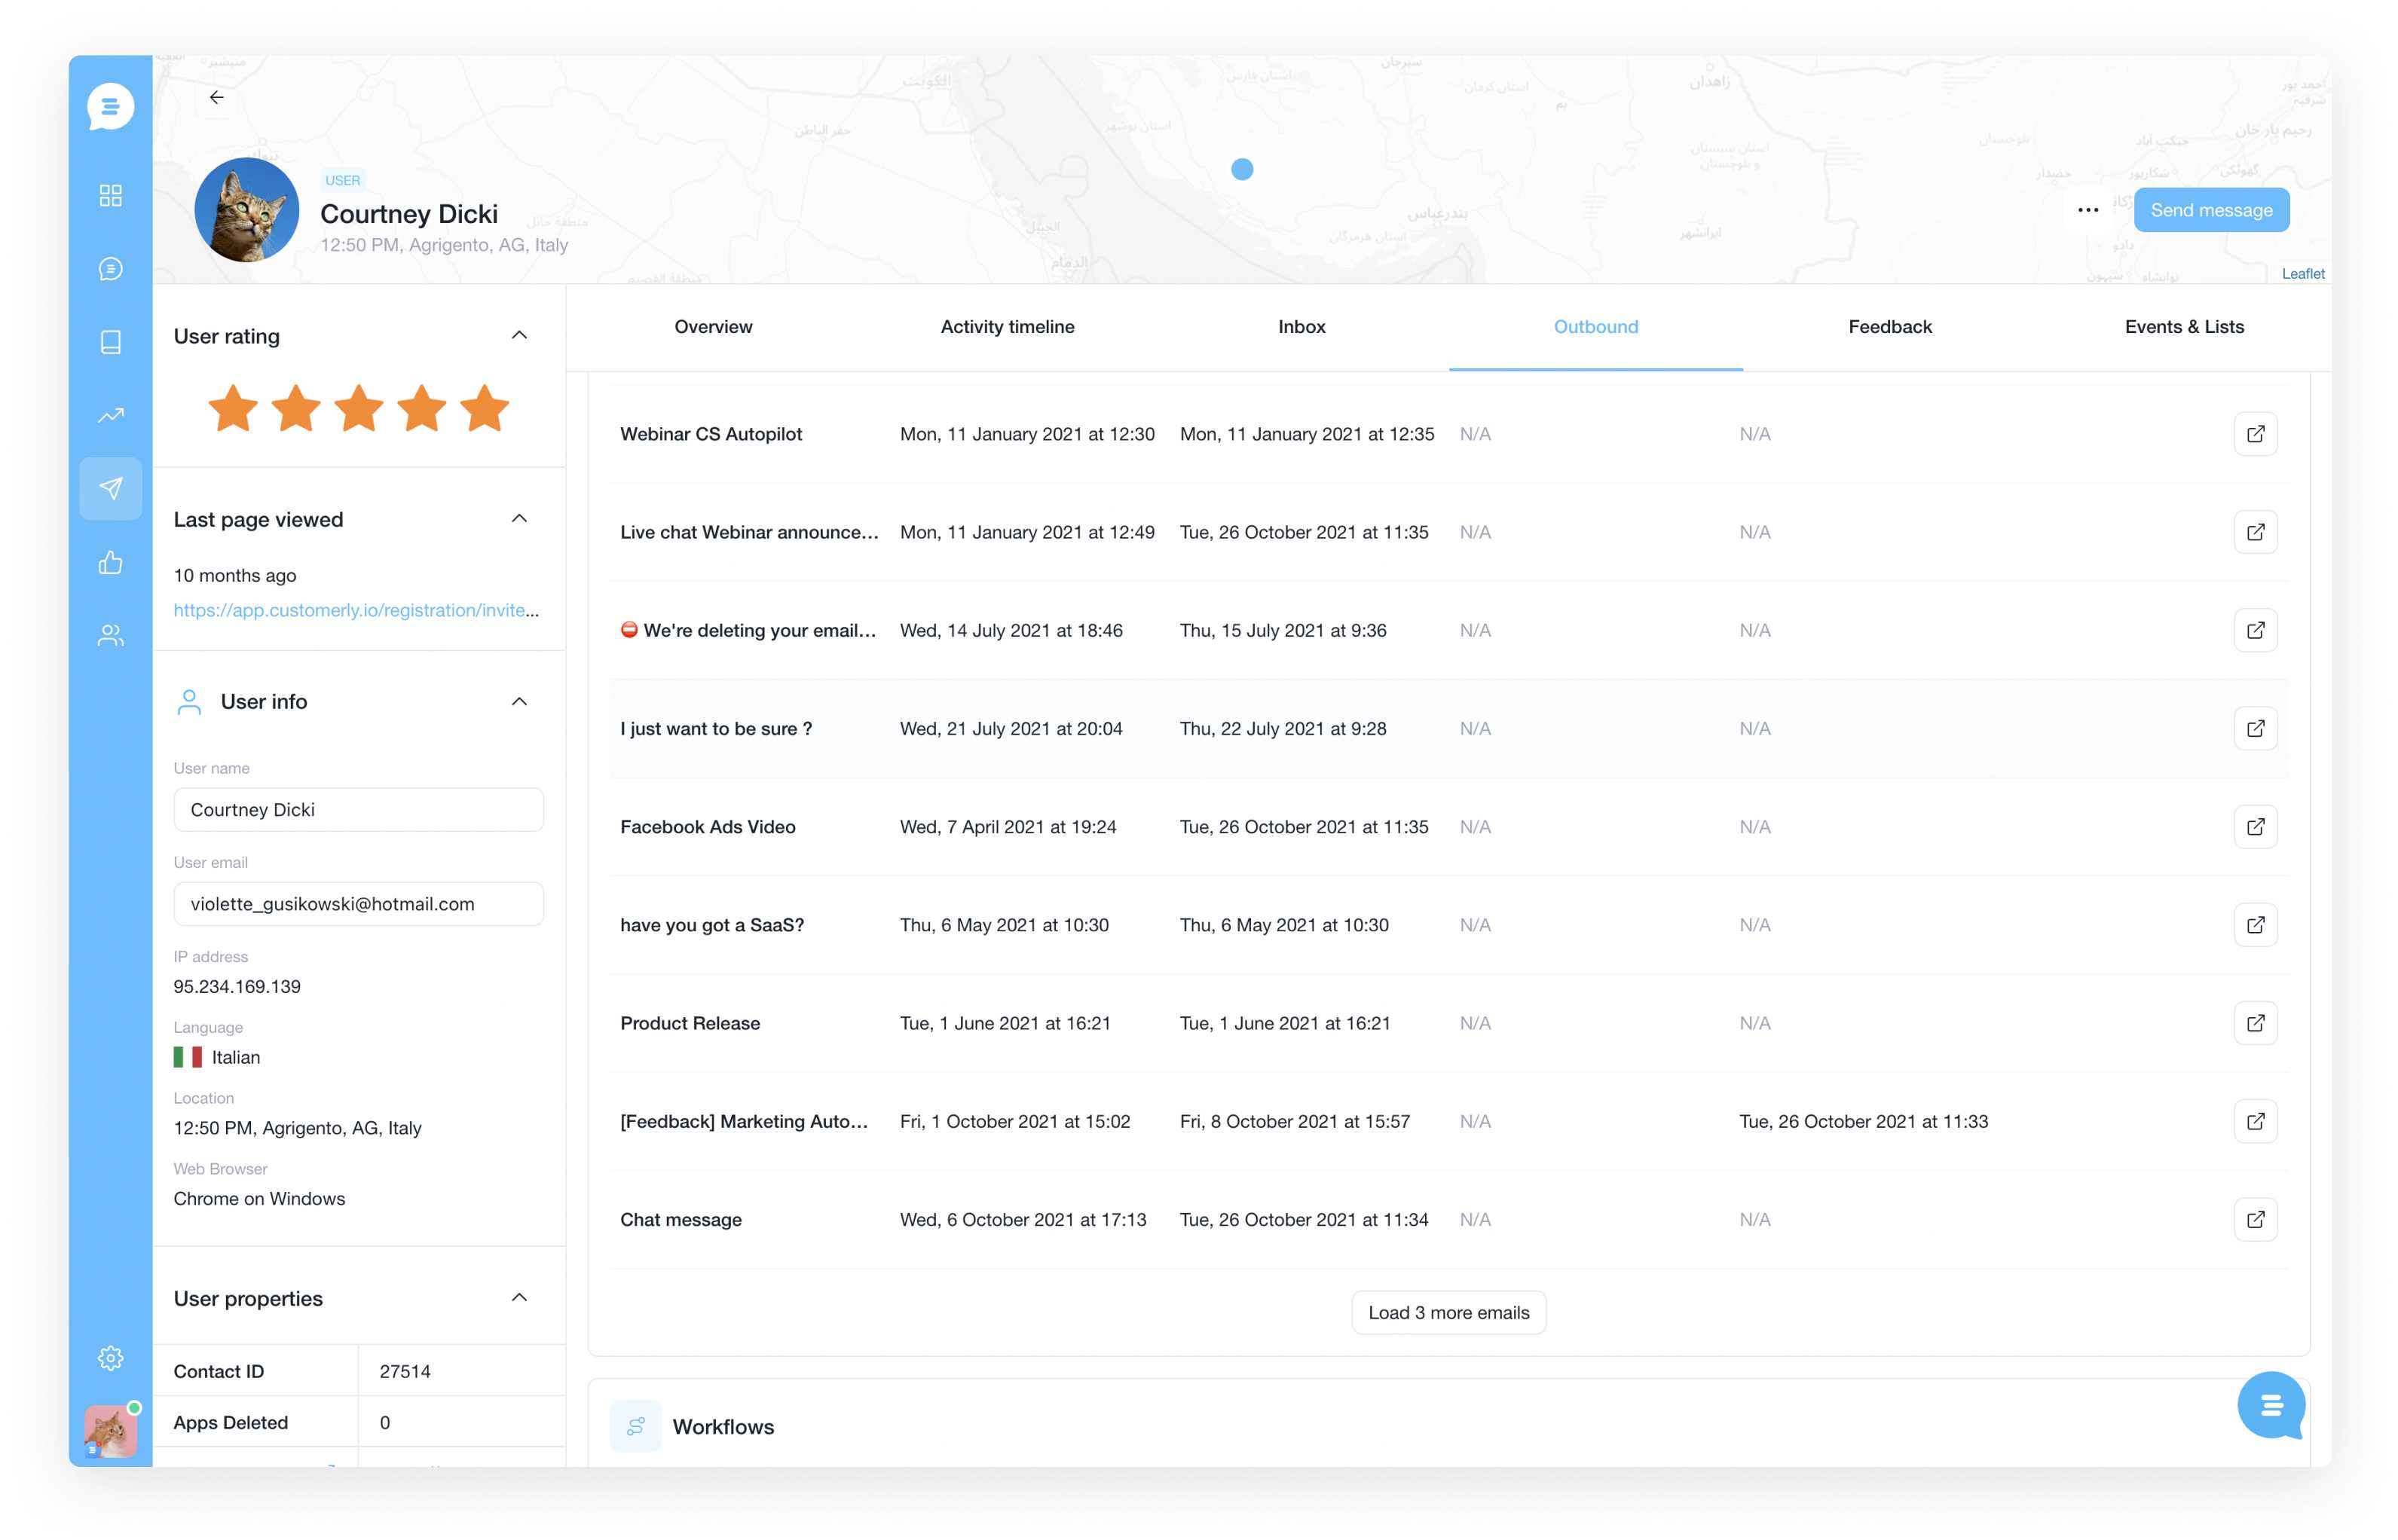 Detailed campaigns reports for each customer